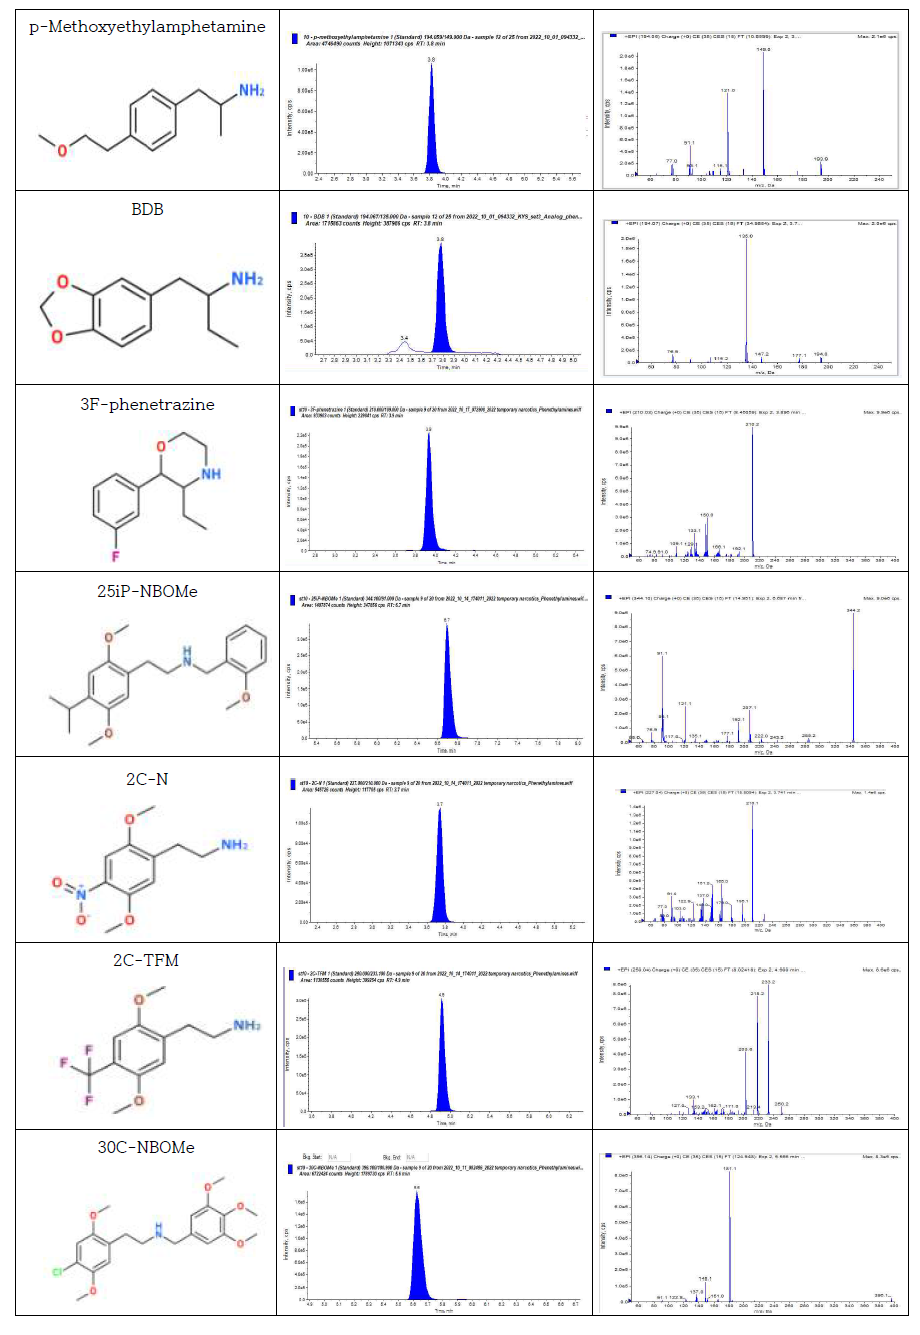 MRM transition and mass spectra for 18 phenylethylamine analogues and intern al standards(continued)